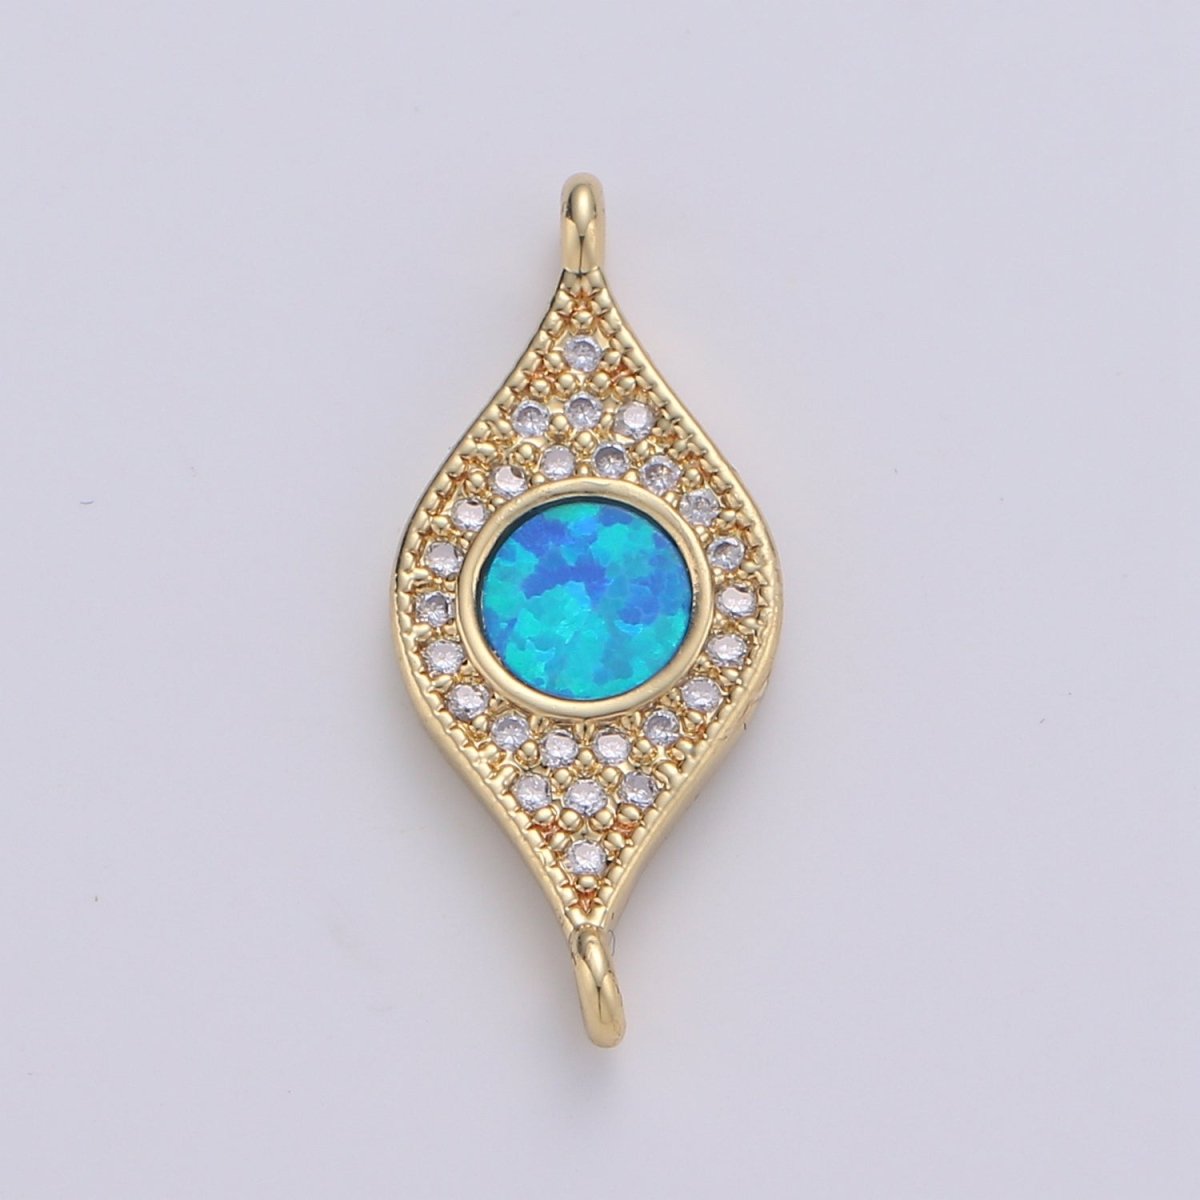 Dainty Opal Bracelet Connector Gold Evil Eye Charm 14k Gold Fill Peacock Feather Charm Connector for Bracelet Necklace Charm Component F-491 F-492 F-493 - DLUXCA